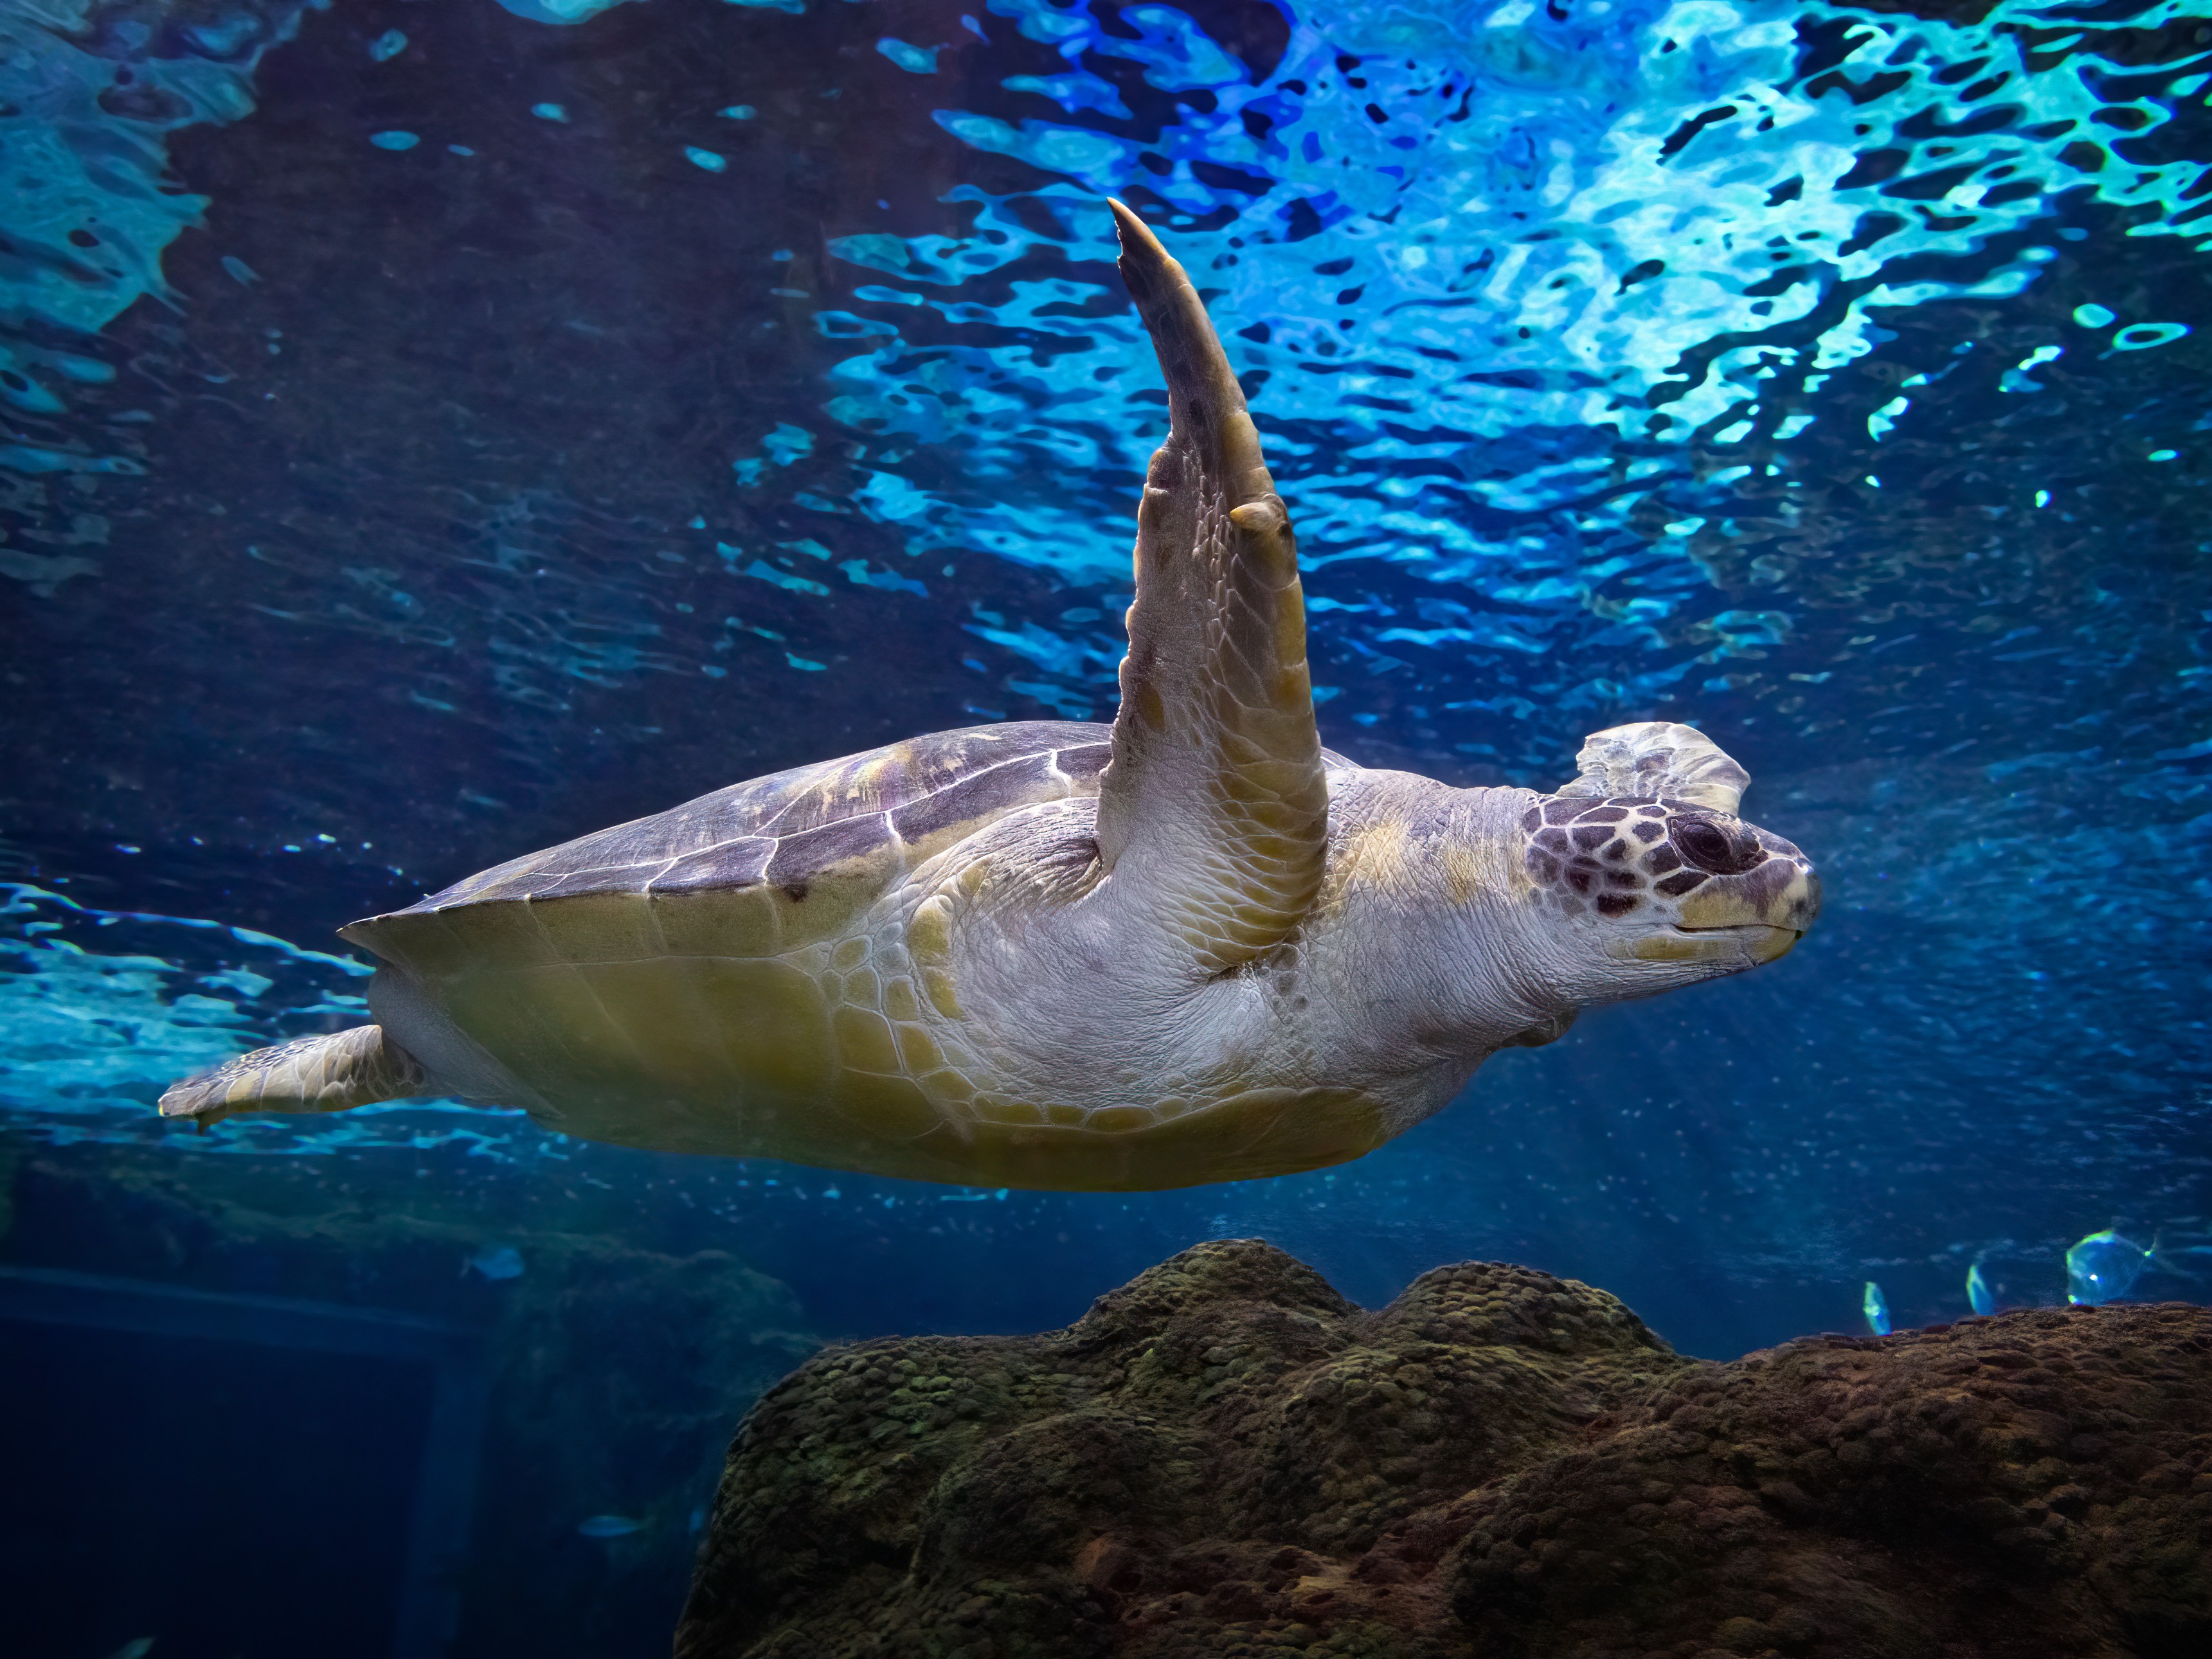 Ripley's Aquarium of Canada on X: Adult green sea turtles typically grow 3  to 4 feet long and up to 350 pounds, but have been found as large as 700  pounds! Sea